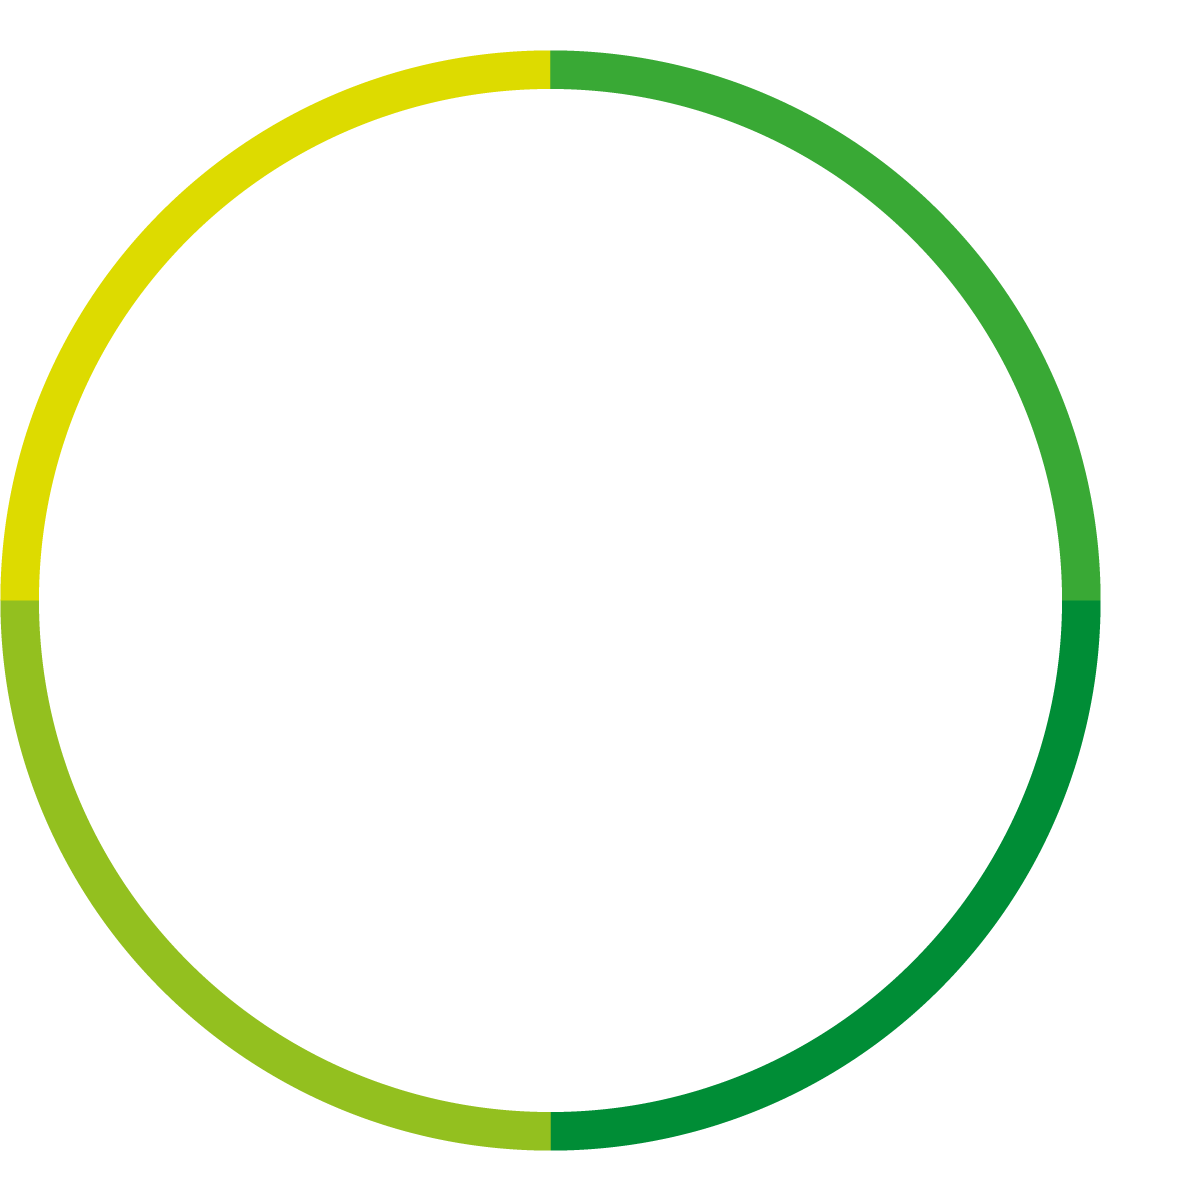 Low Carbon Energy - 250% Increase In Conversions